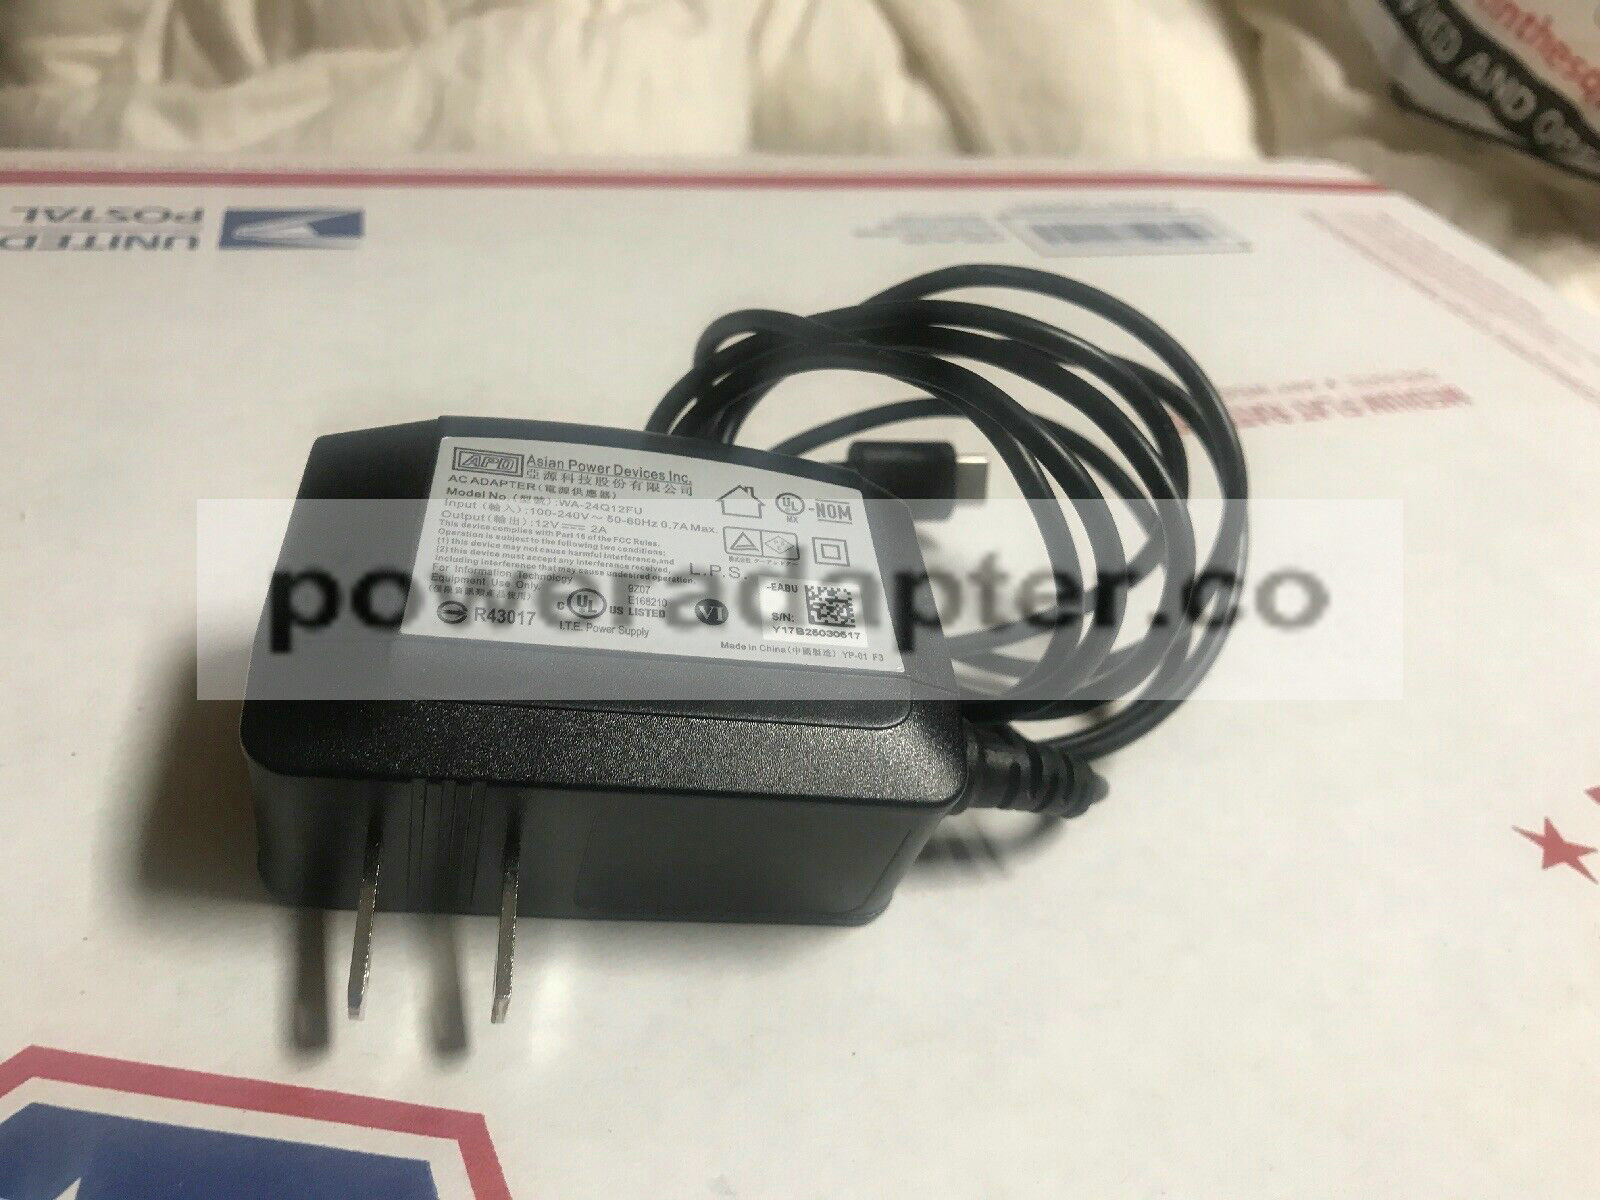 APD AC adapter Charger 12V 2A WA-24Q12FU USB Type C Asian Power Devices USA EU UK plug Products specifications Model